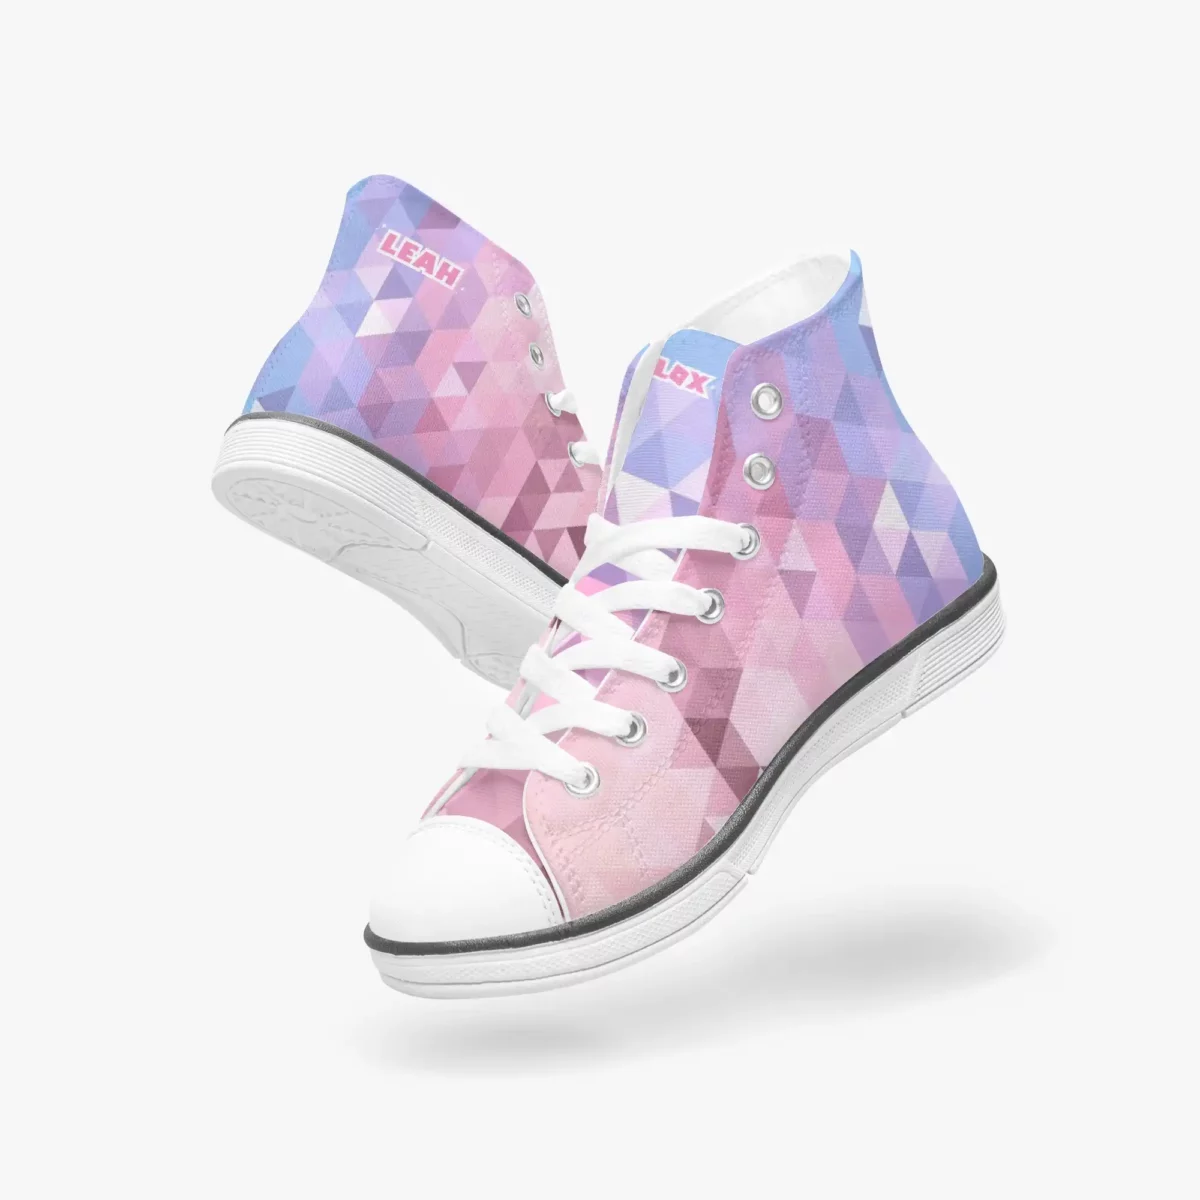 Roblox Girls Personalized High-Top Sneakers for Children – Pink and Purple geometric background Cool Kiddo 20